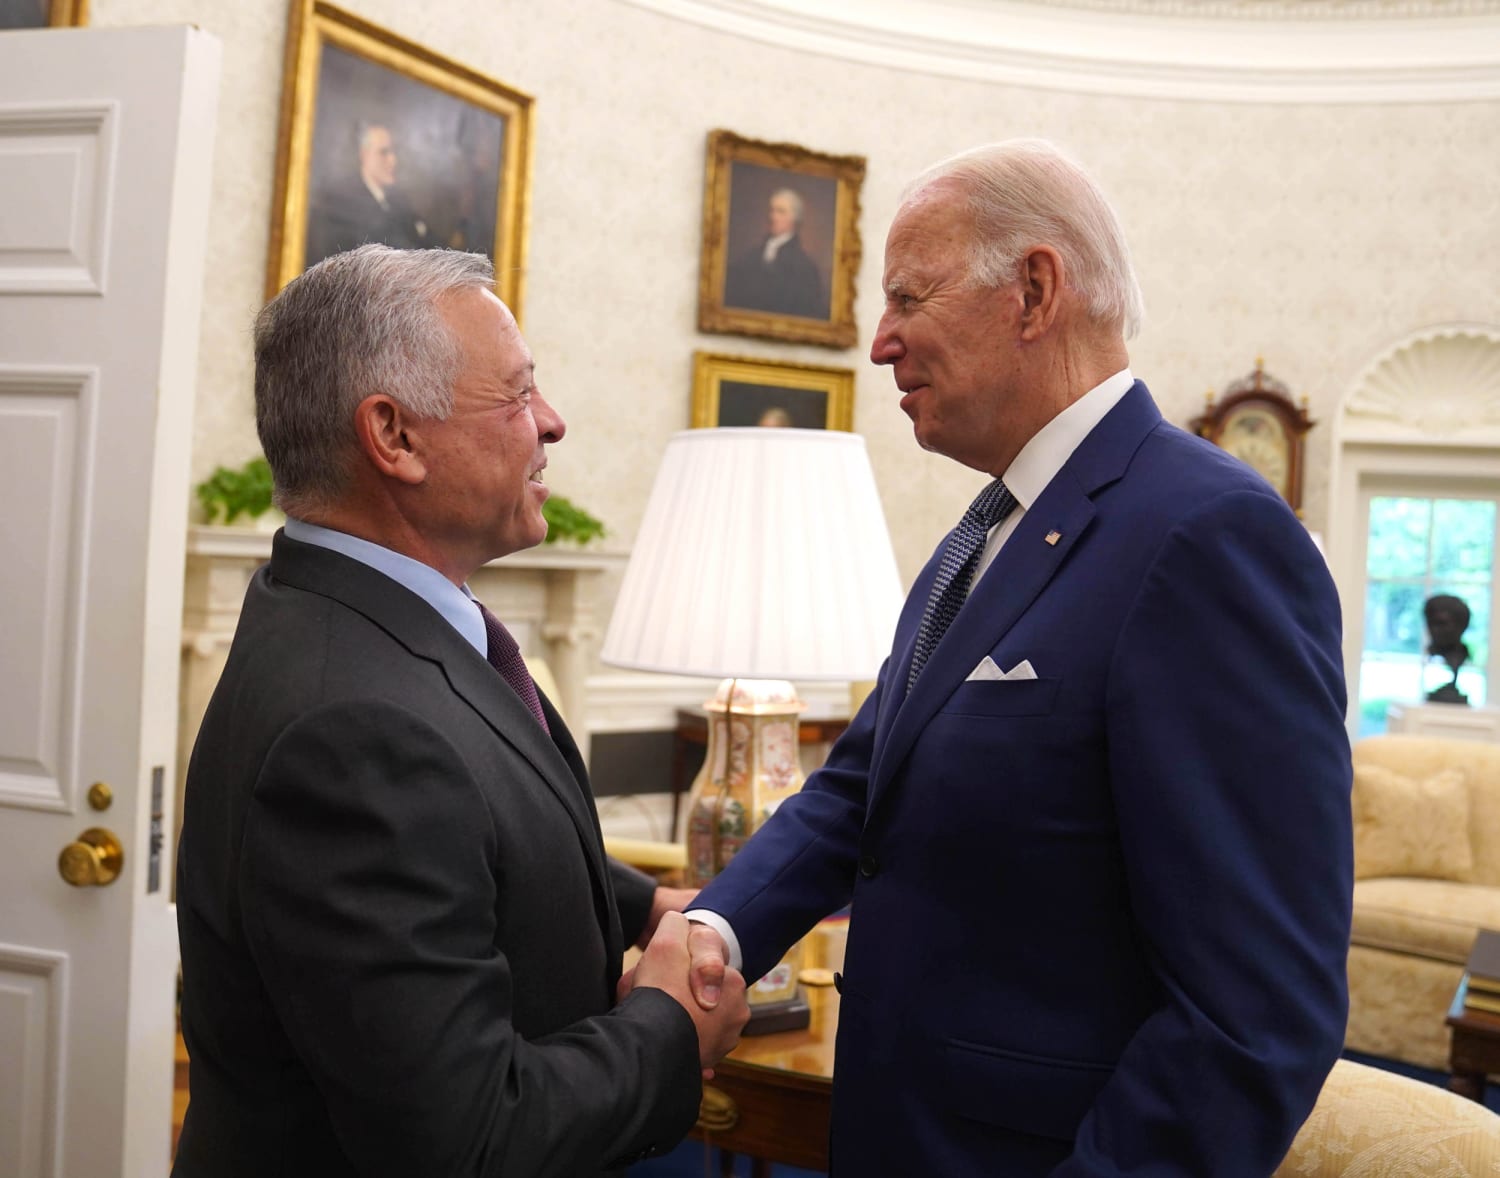 Biden and king of Jordan discuss hostage release efforts at White House meeting